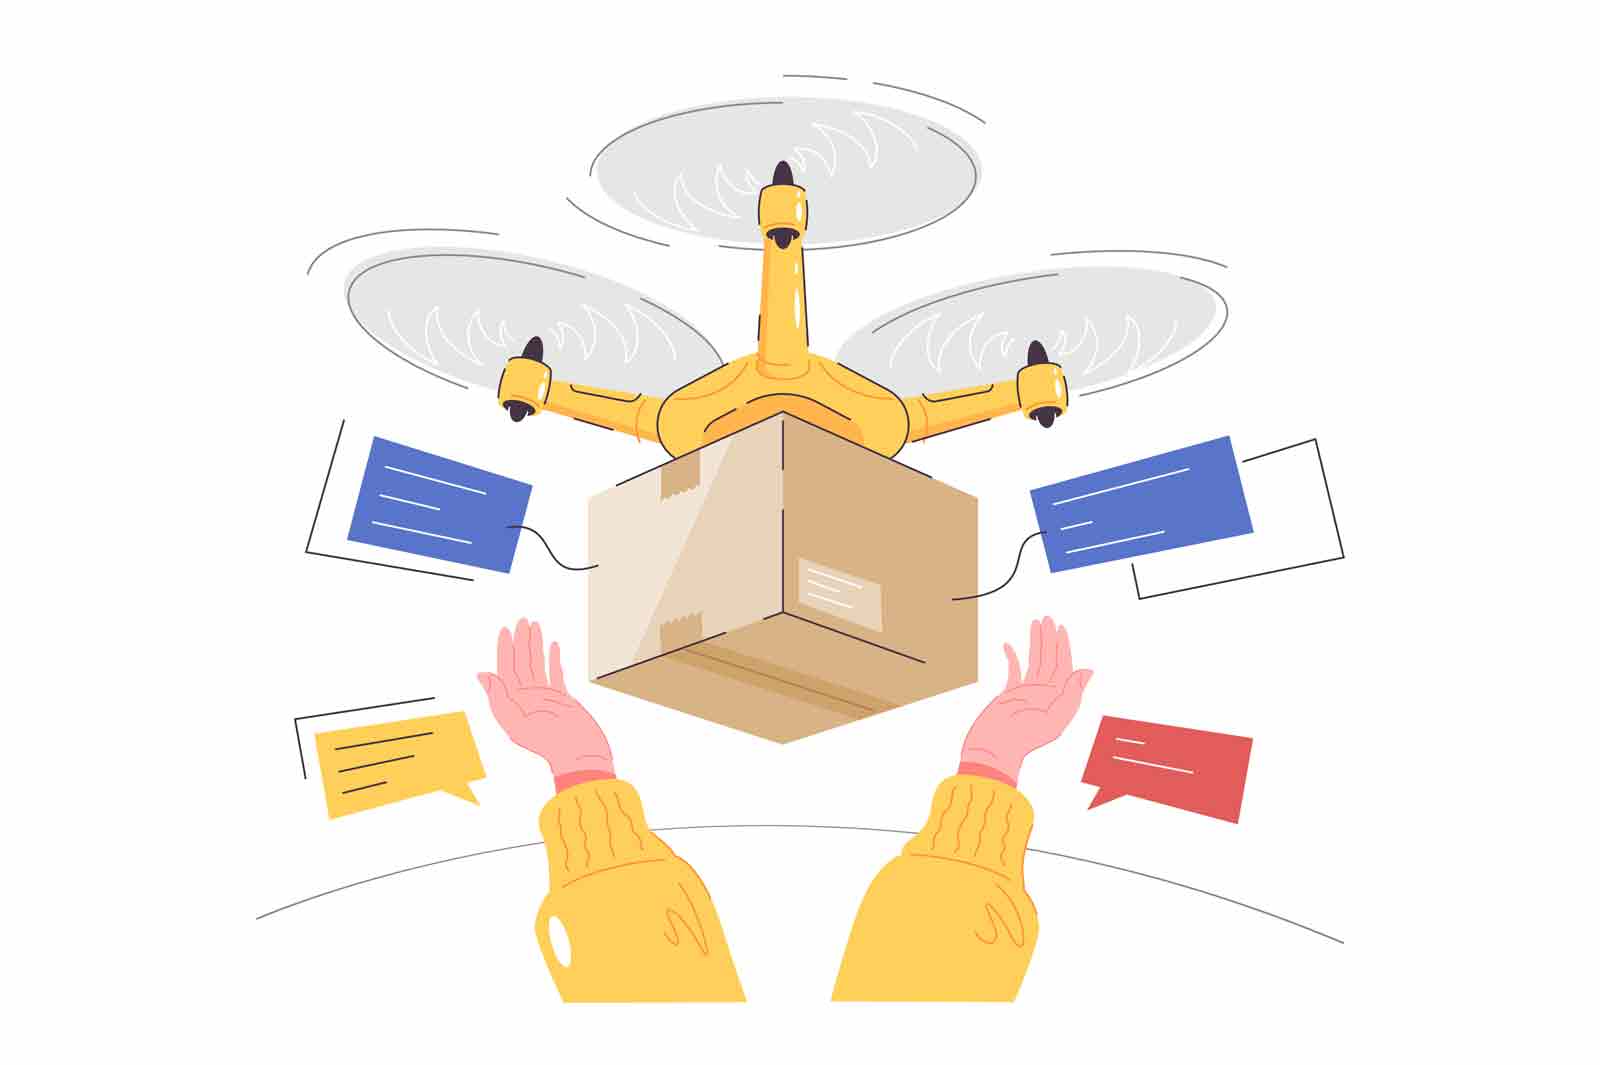 Delivery drones of goods by air using flying vector illustration. Character receive package flat style. Shipping, modern technology concept